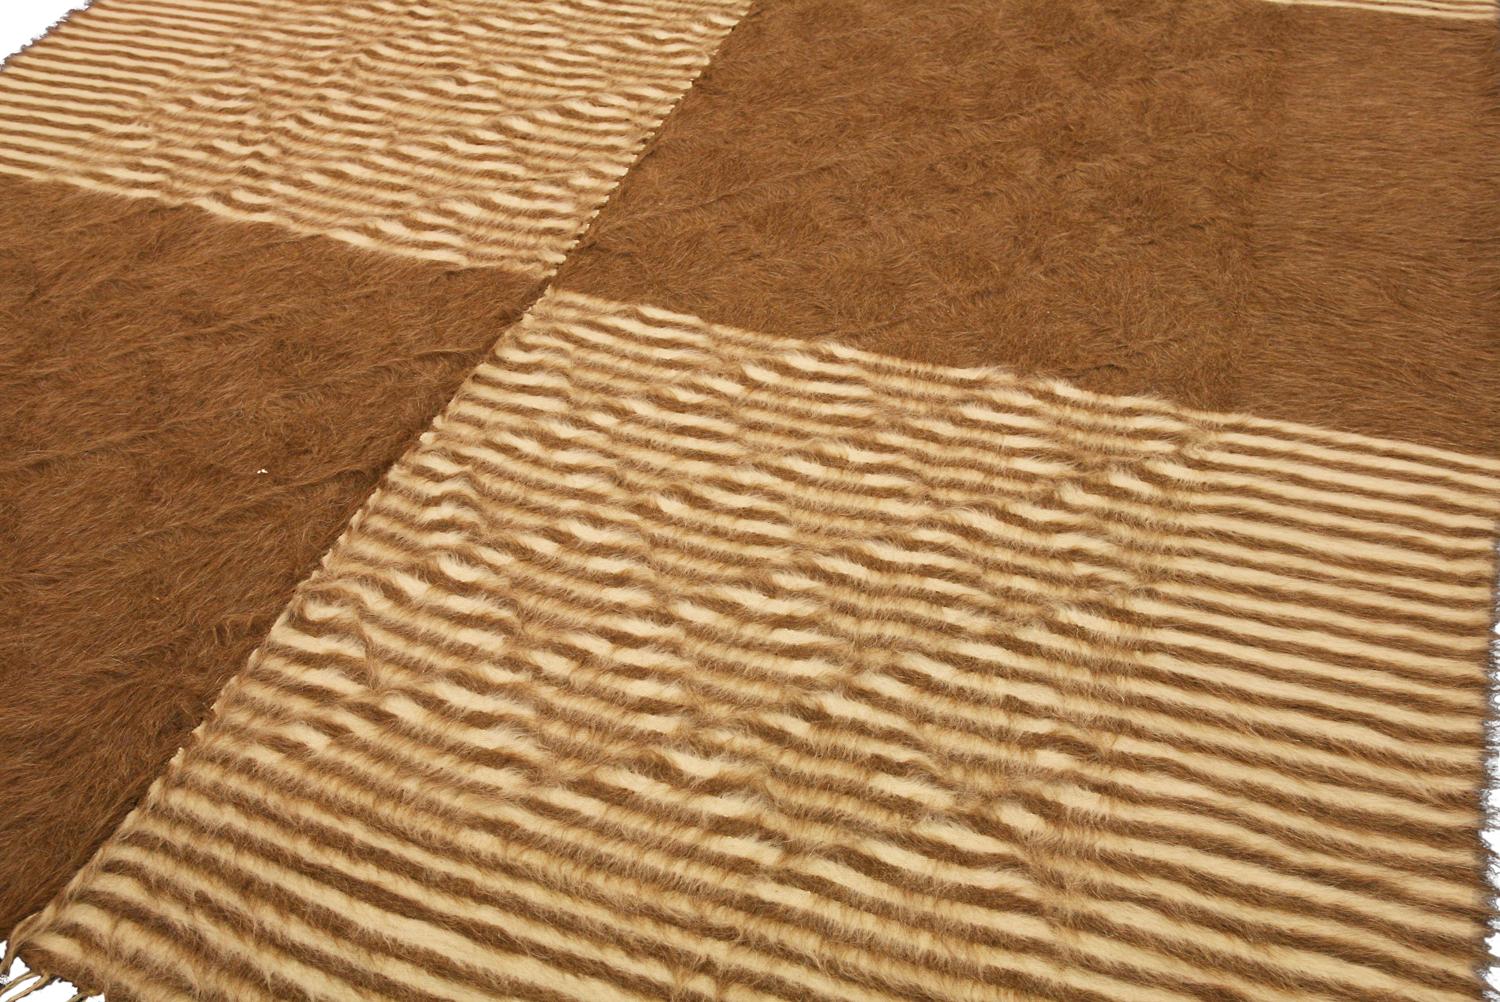 This Turkish Mohair Carpet is perfect for anyone who wants to add a touch of luxury to their home. With its rich brown color and exquisite minimal design, this carpet will make any room look more elegant . The measurement of this rug is 284 x 203 CM